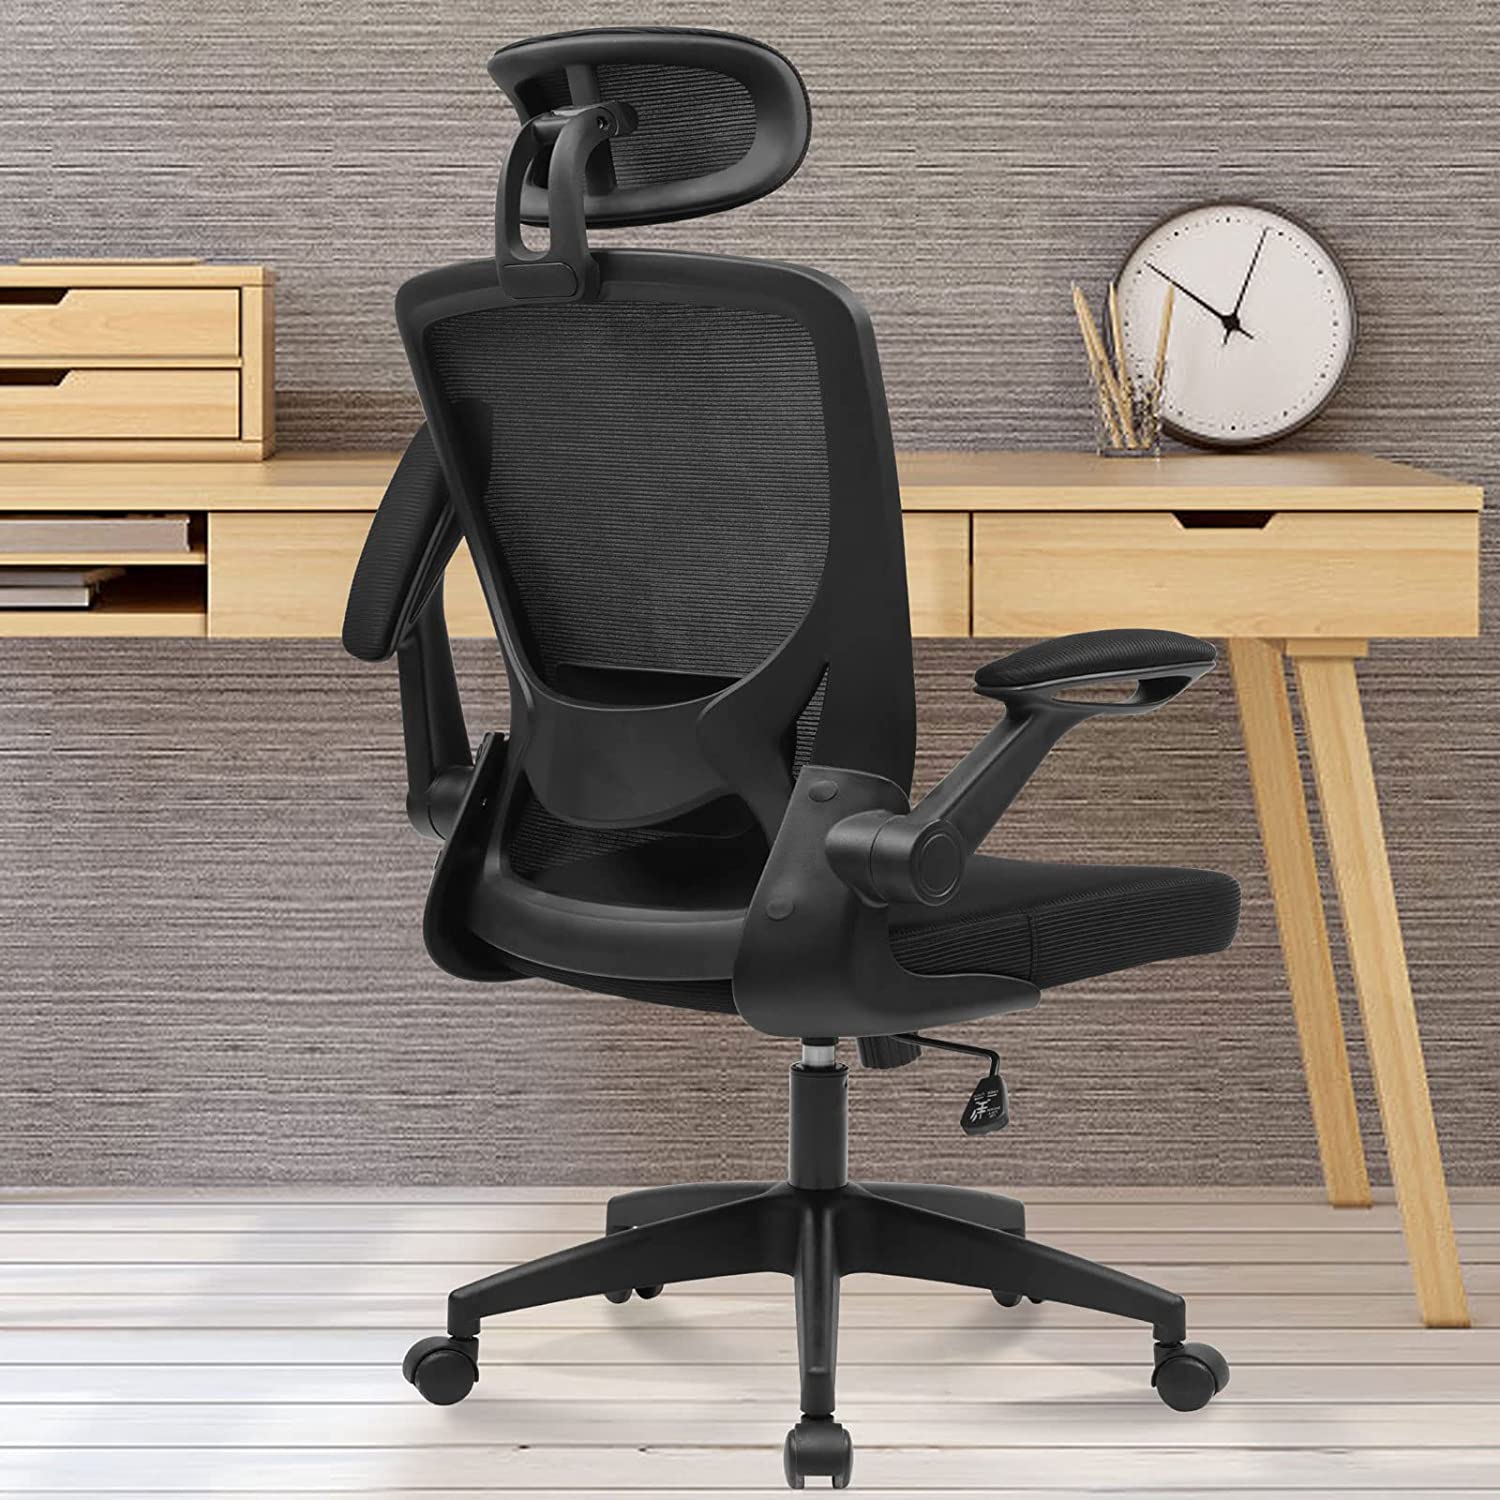 Kerdom Ergonomic Home Office Chair|Mesh Back Computer and Desk Chair